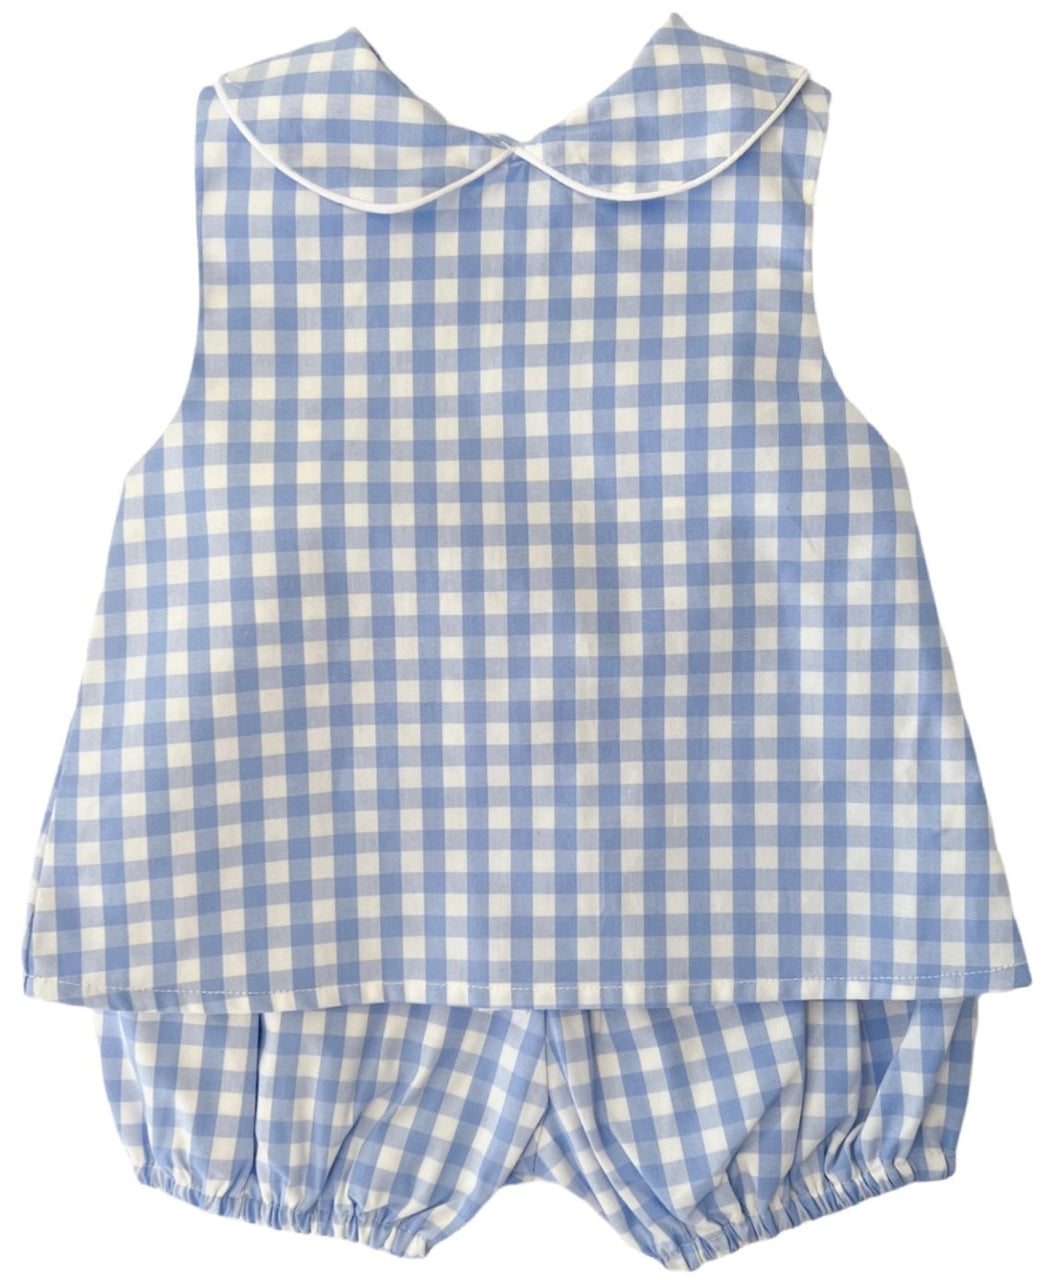 The Layette Set - Blue Gingham